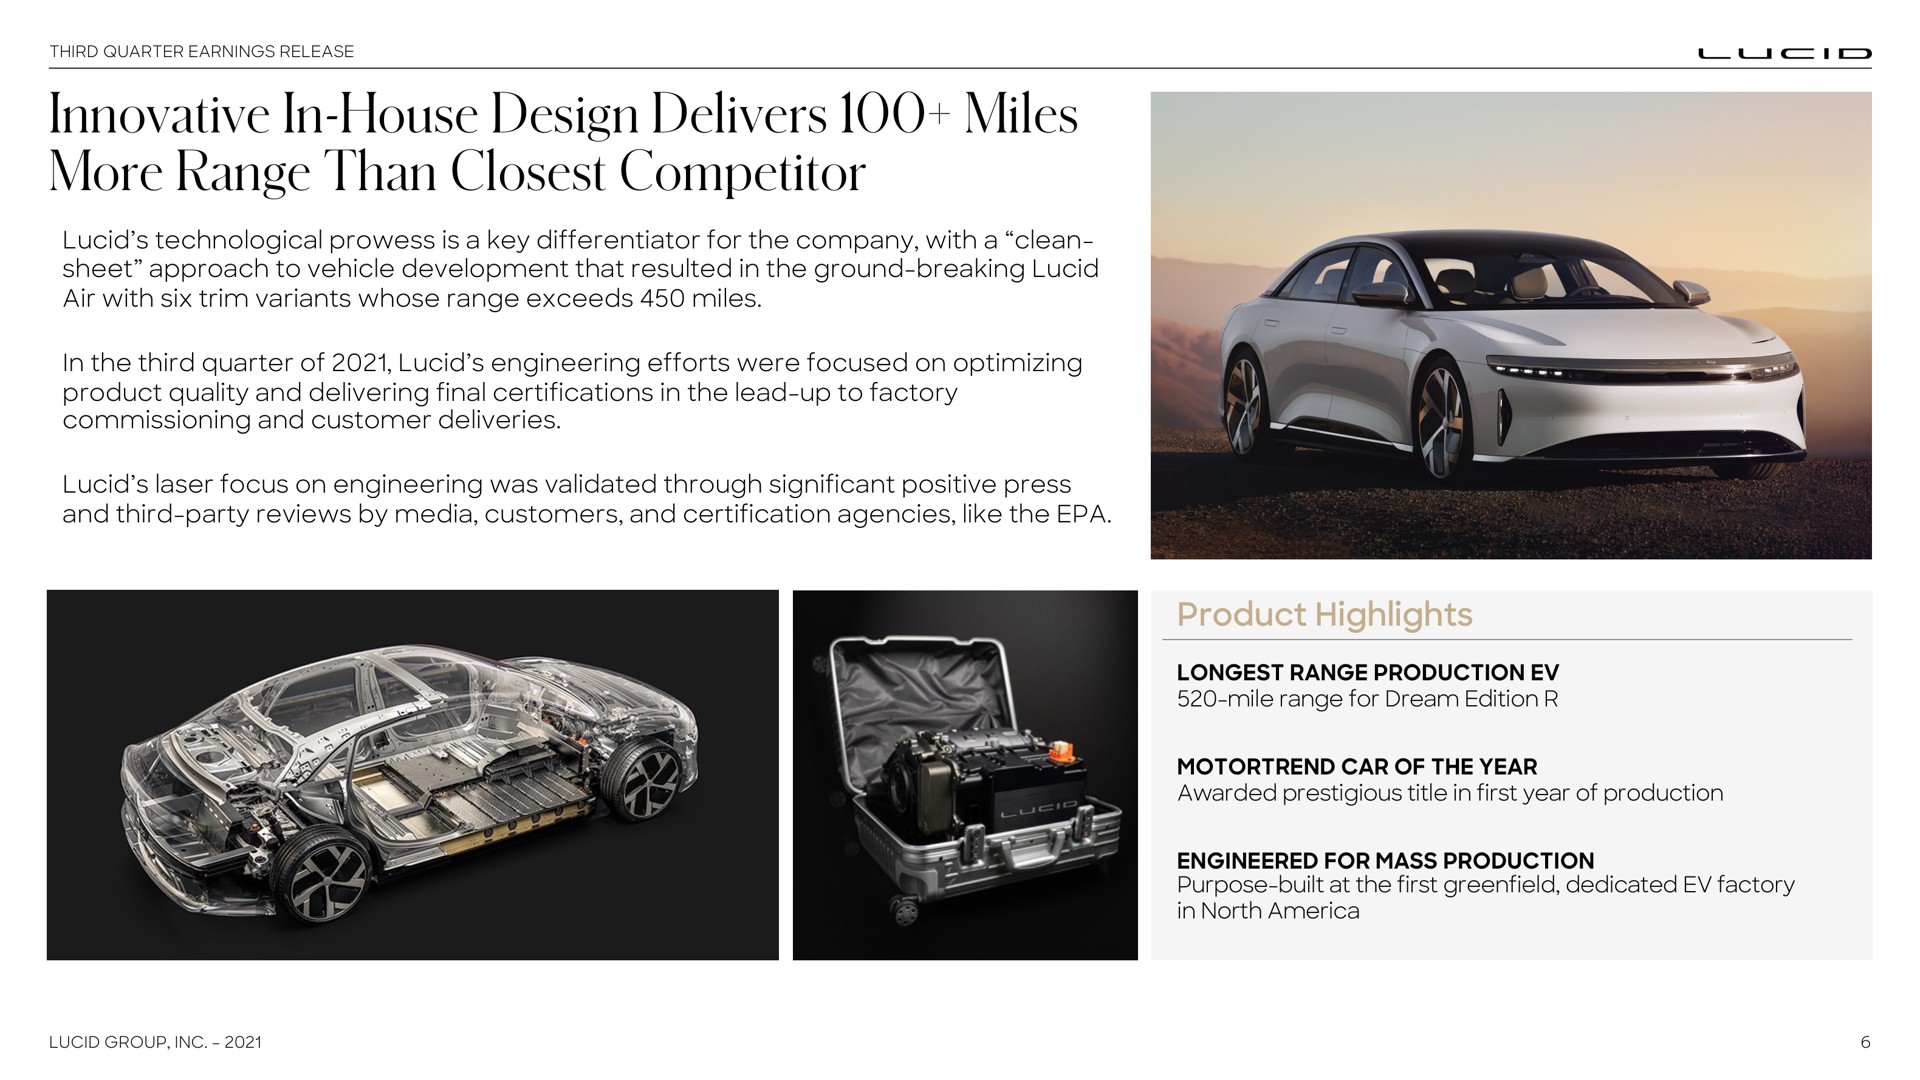 innovative in house design delivers miles more range than competitor | Lucid Motors